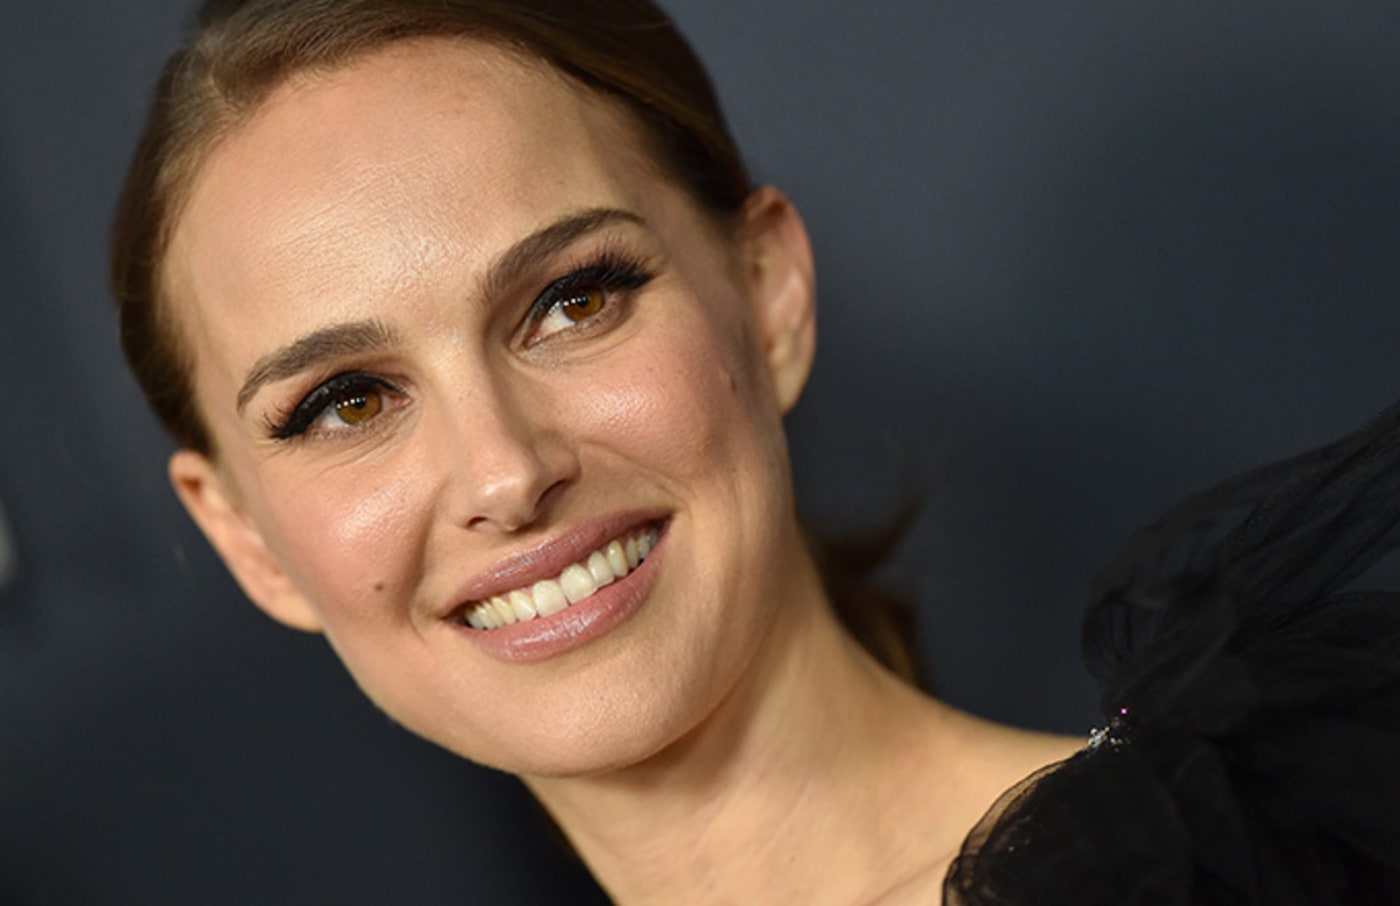 This is a photo of Natalie Portman.